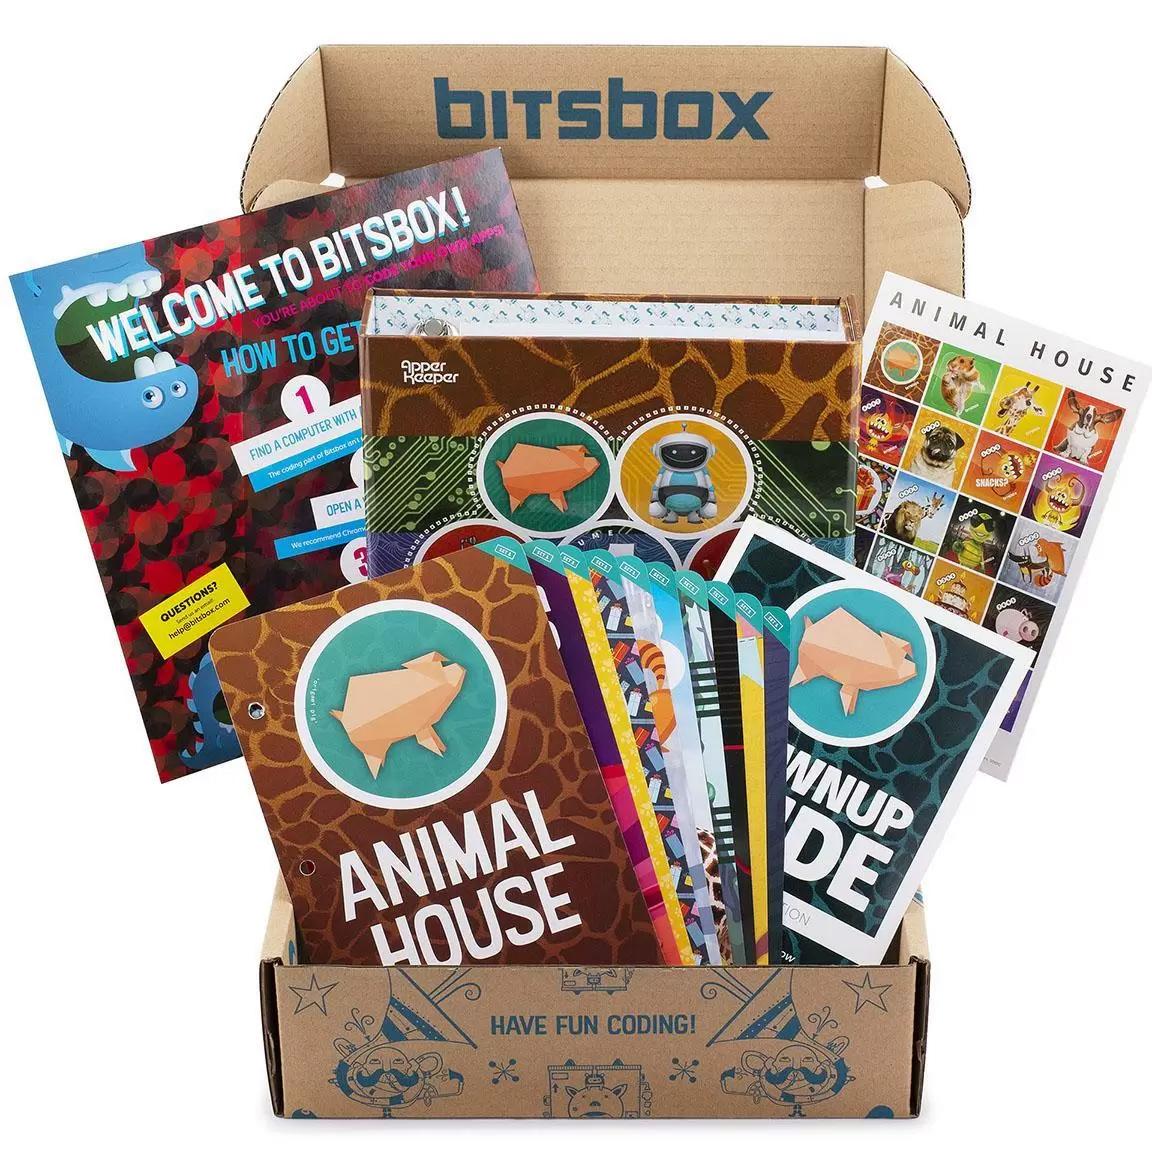 Bitsbox Coding Subscription Box for Kids for $14.97